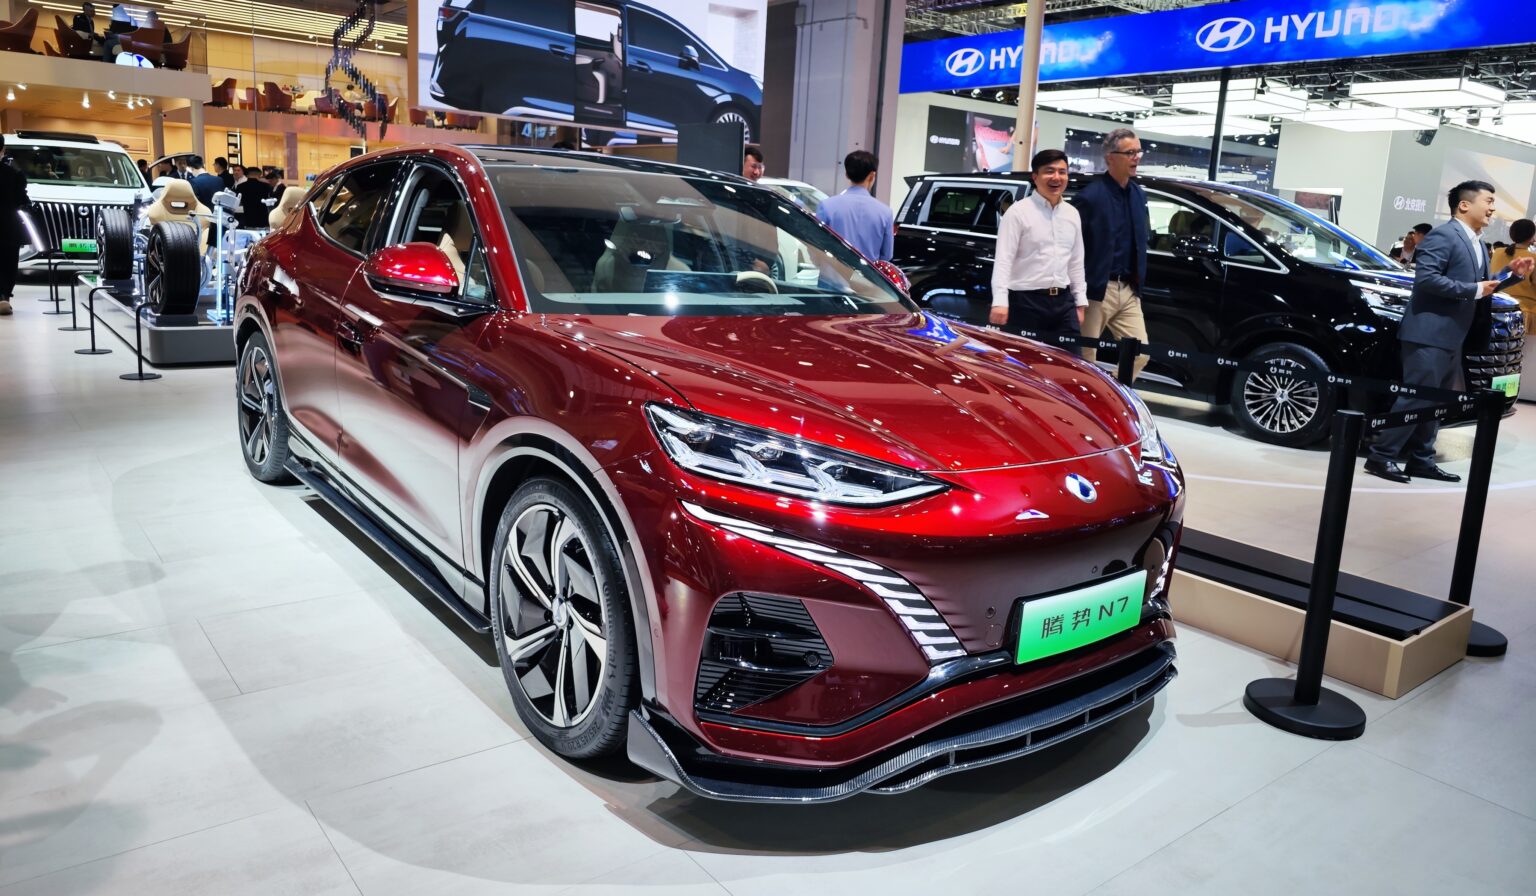 BYD's Denza N7 SUV received 10,500 preorders in seven days